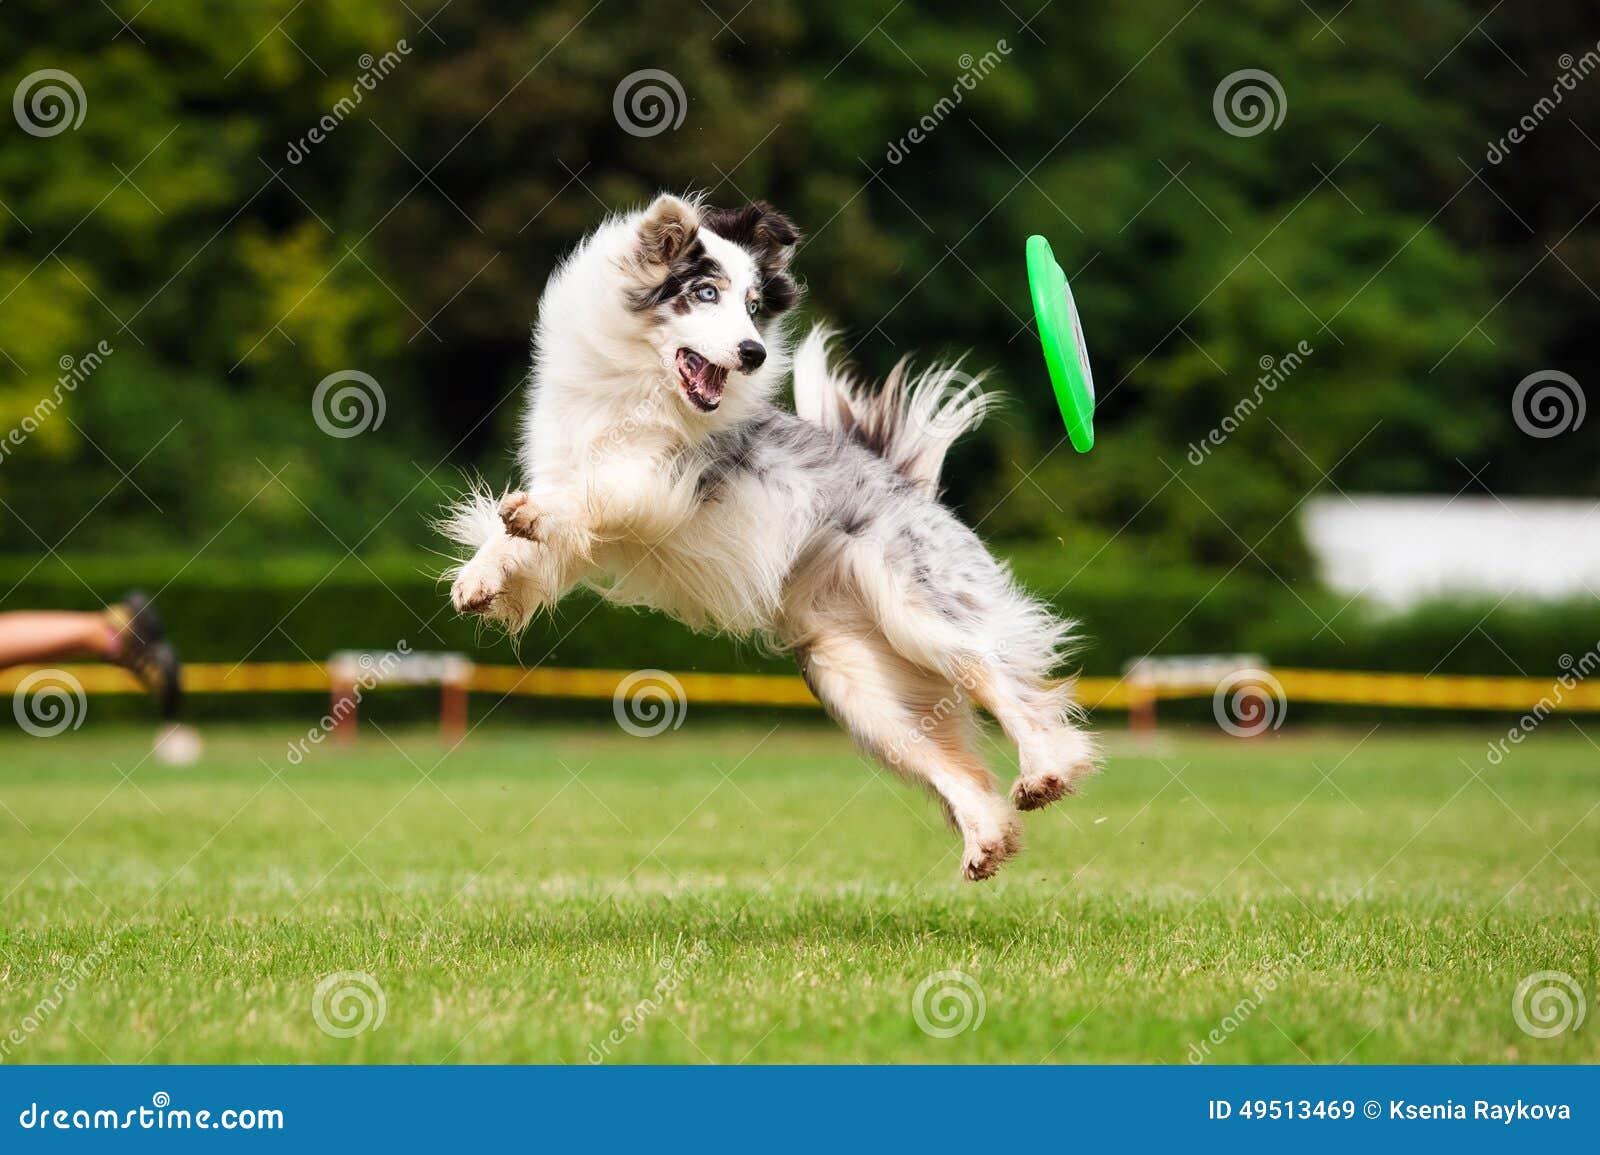 border collie dog catching frisbee in jump